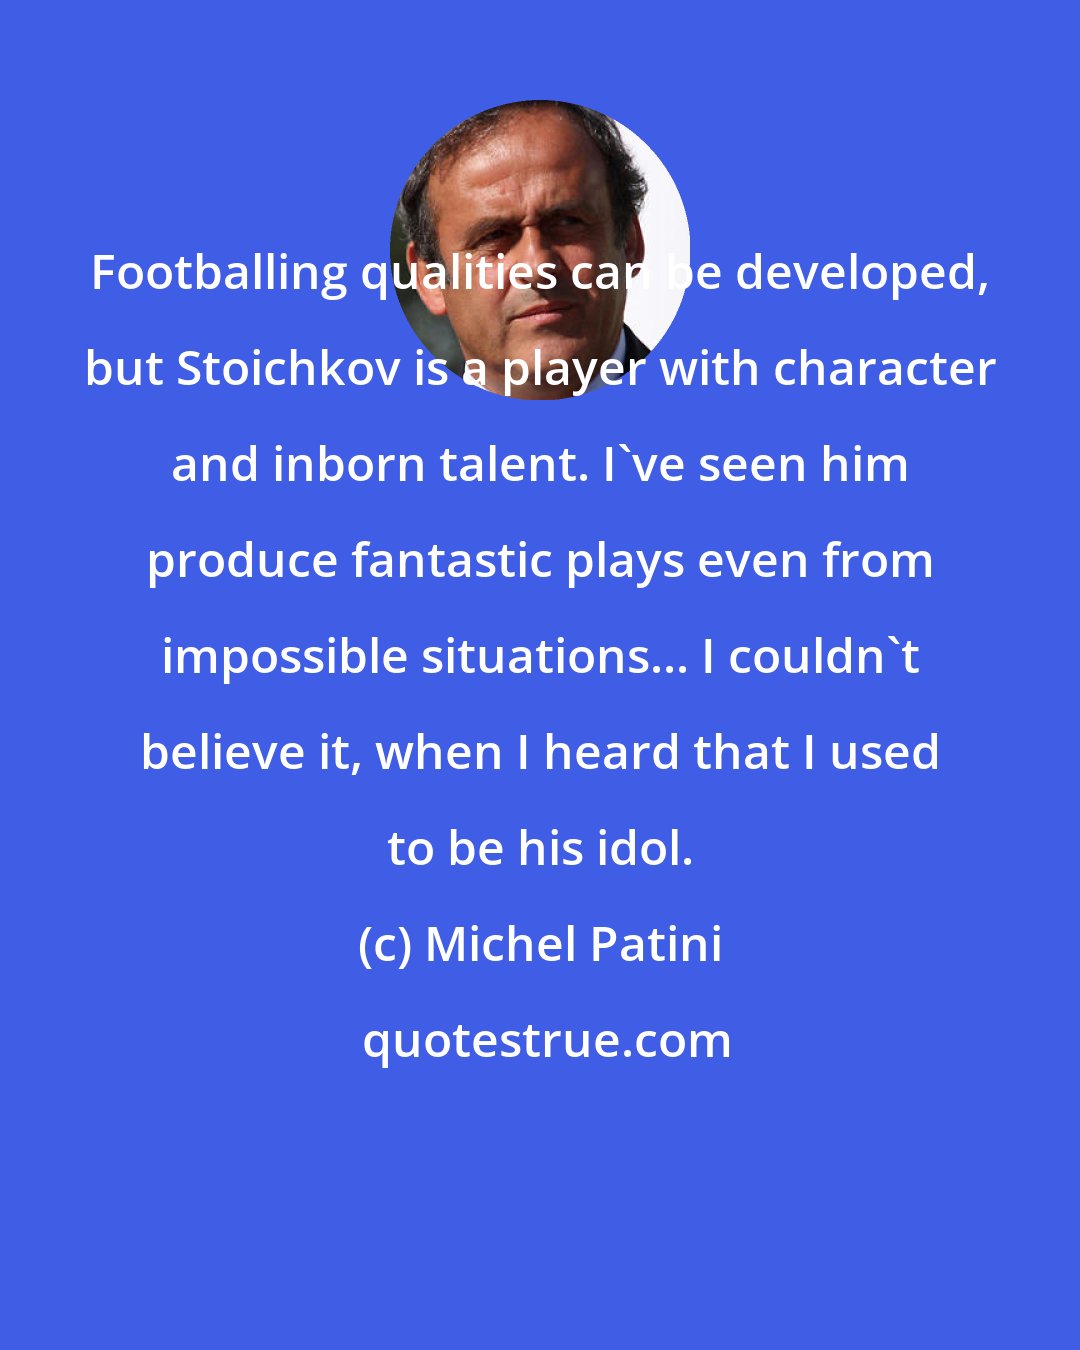 Michel Patini: Footballing qualities can be developed, but Stoichkov is a player with character and inborn talent. I've seen him produce fantastic plays even from impossible situations... I couldn't believe it, when I heard that I used to be his idol.